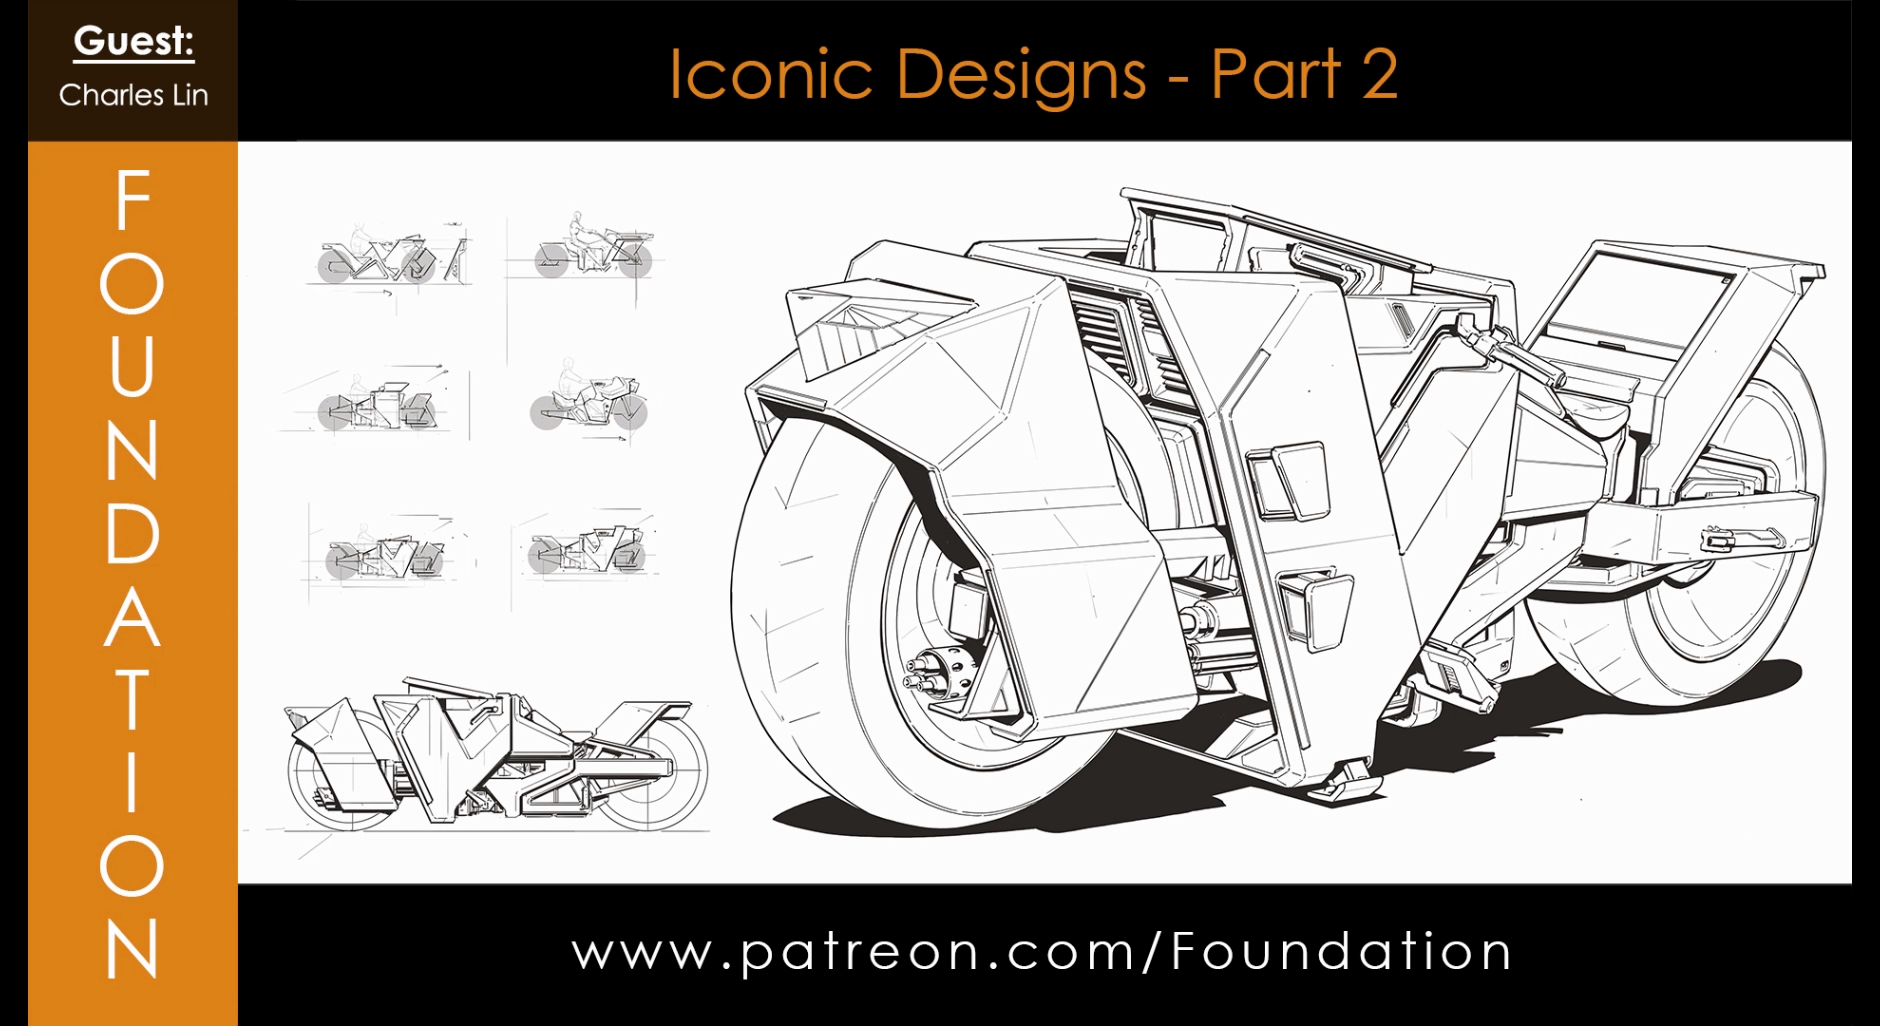 Iconic Designs Part 2 – with Charles Lin